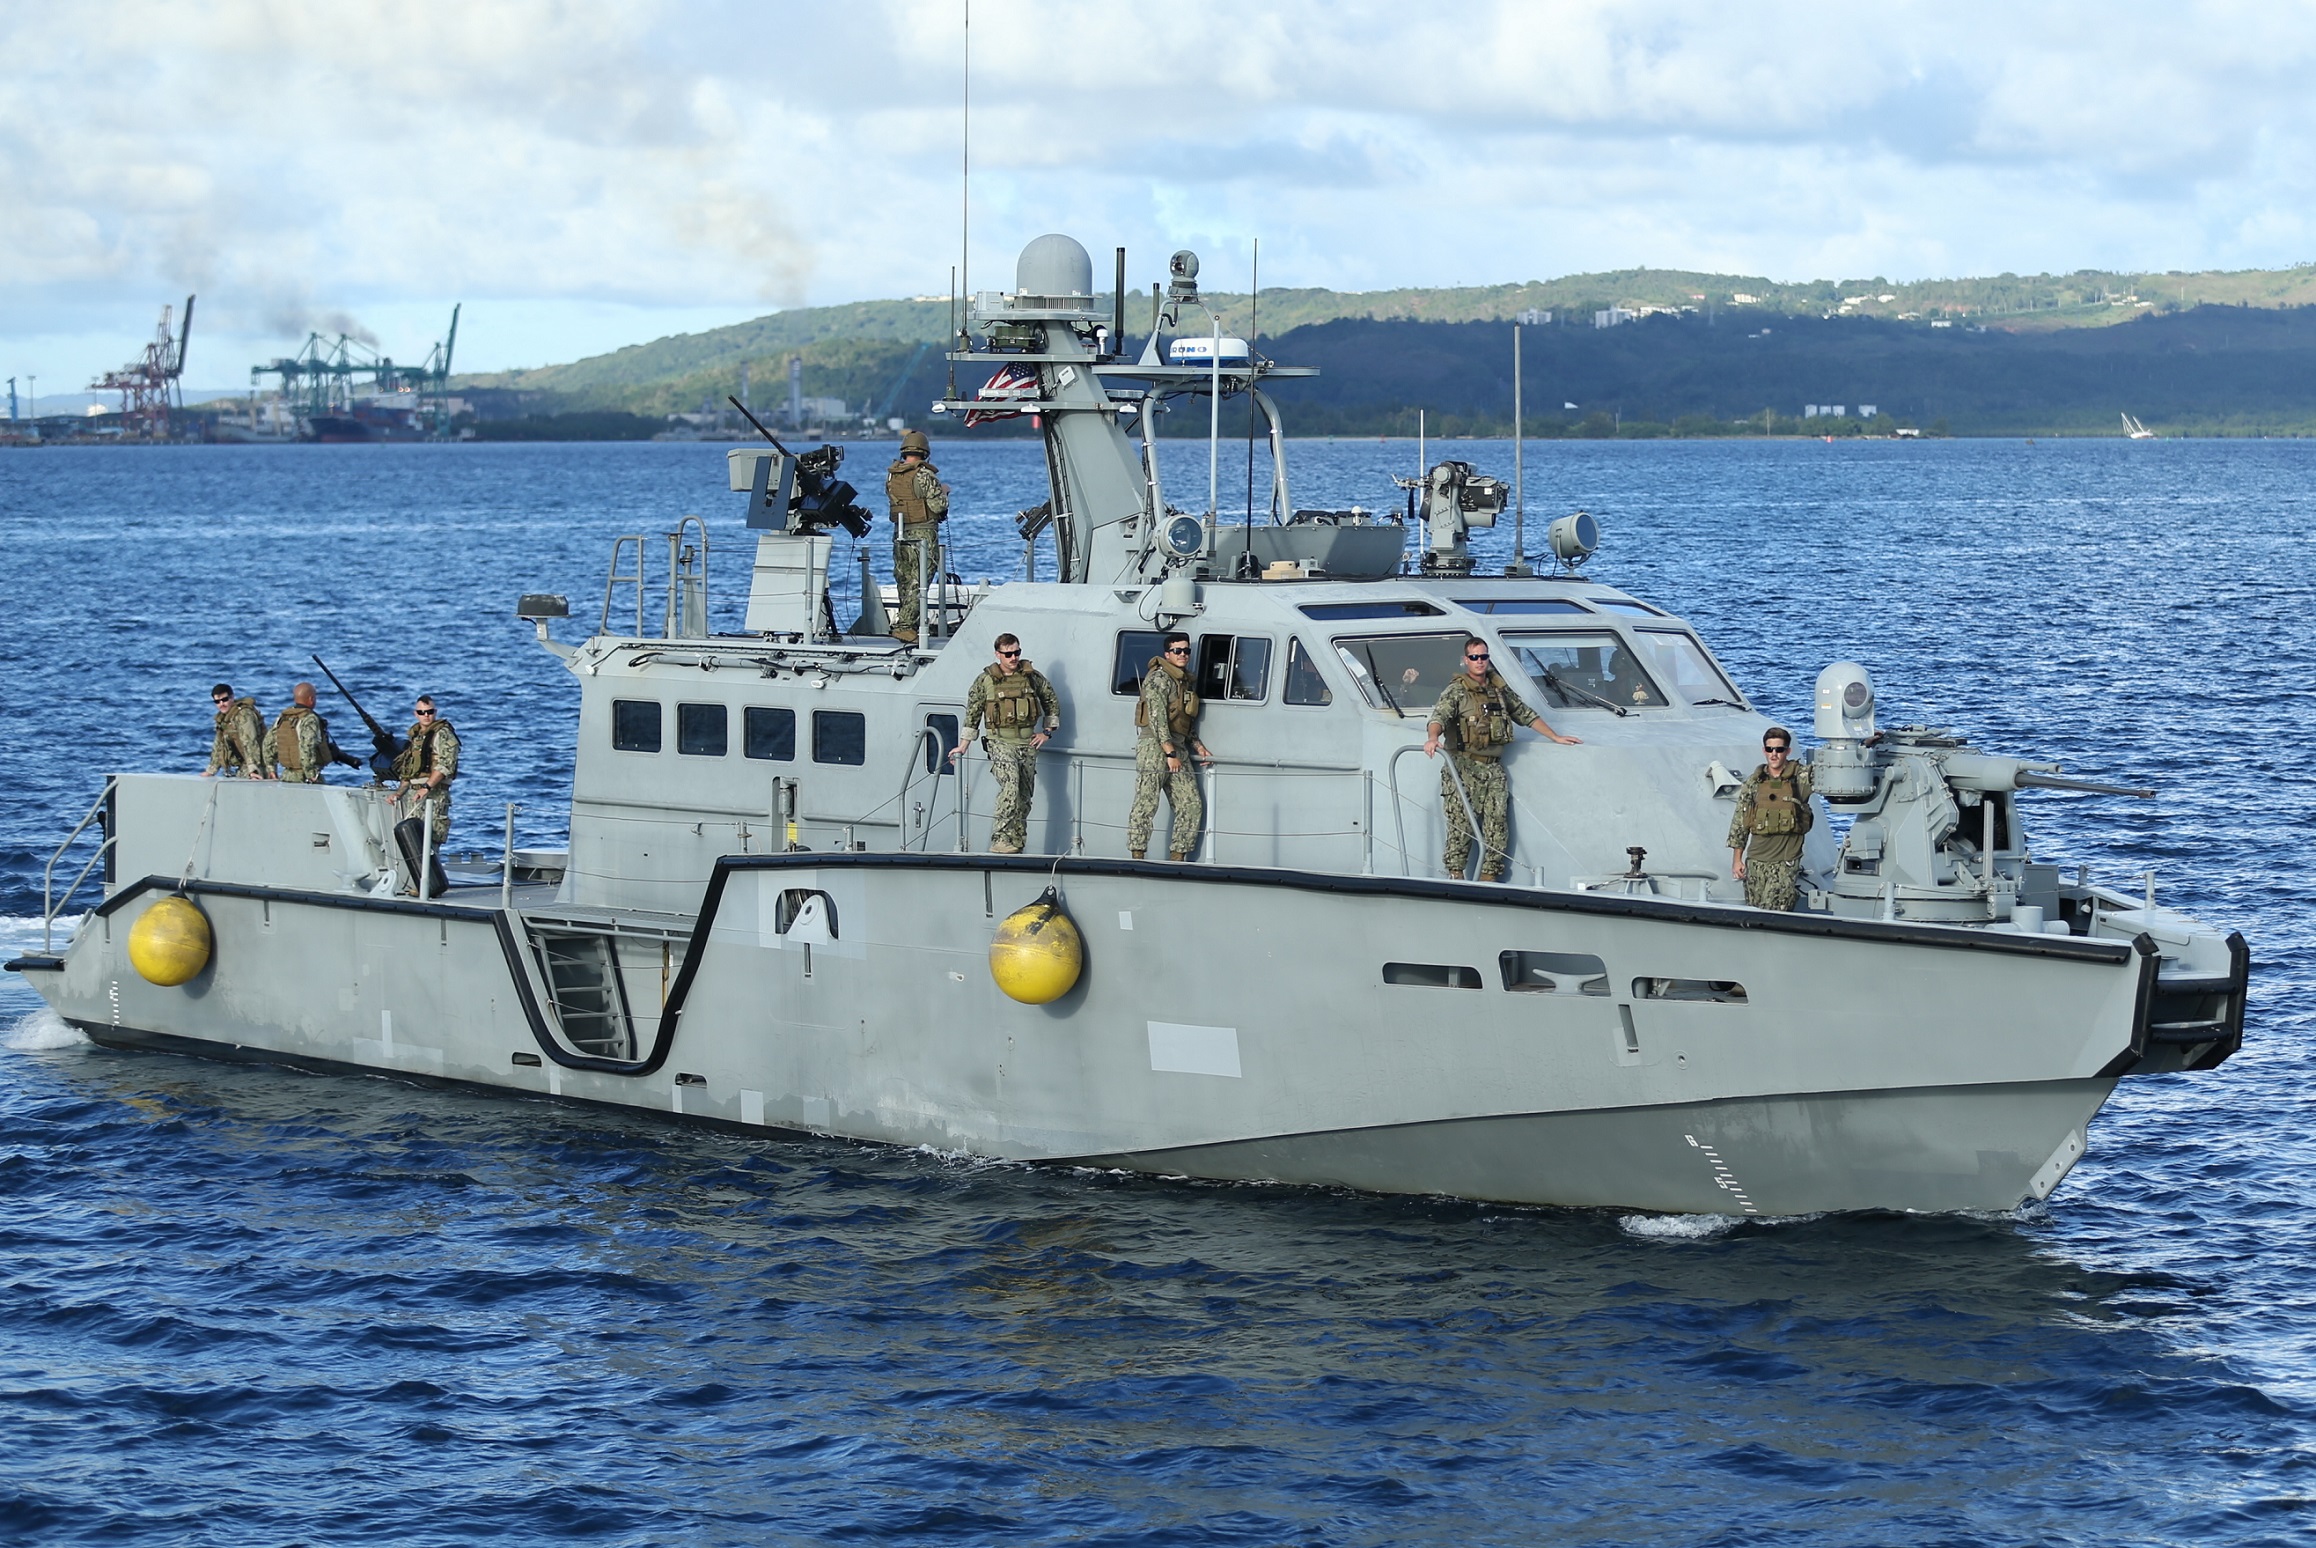 Ukraine Set to Acquire 18 Patrol Boats Courtesy of the United States